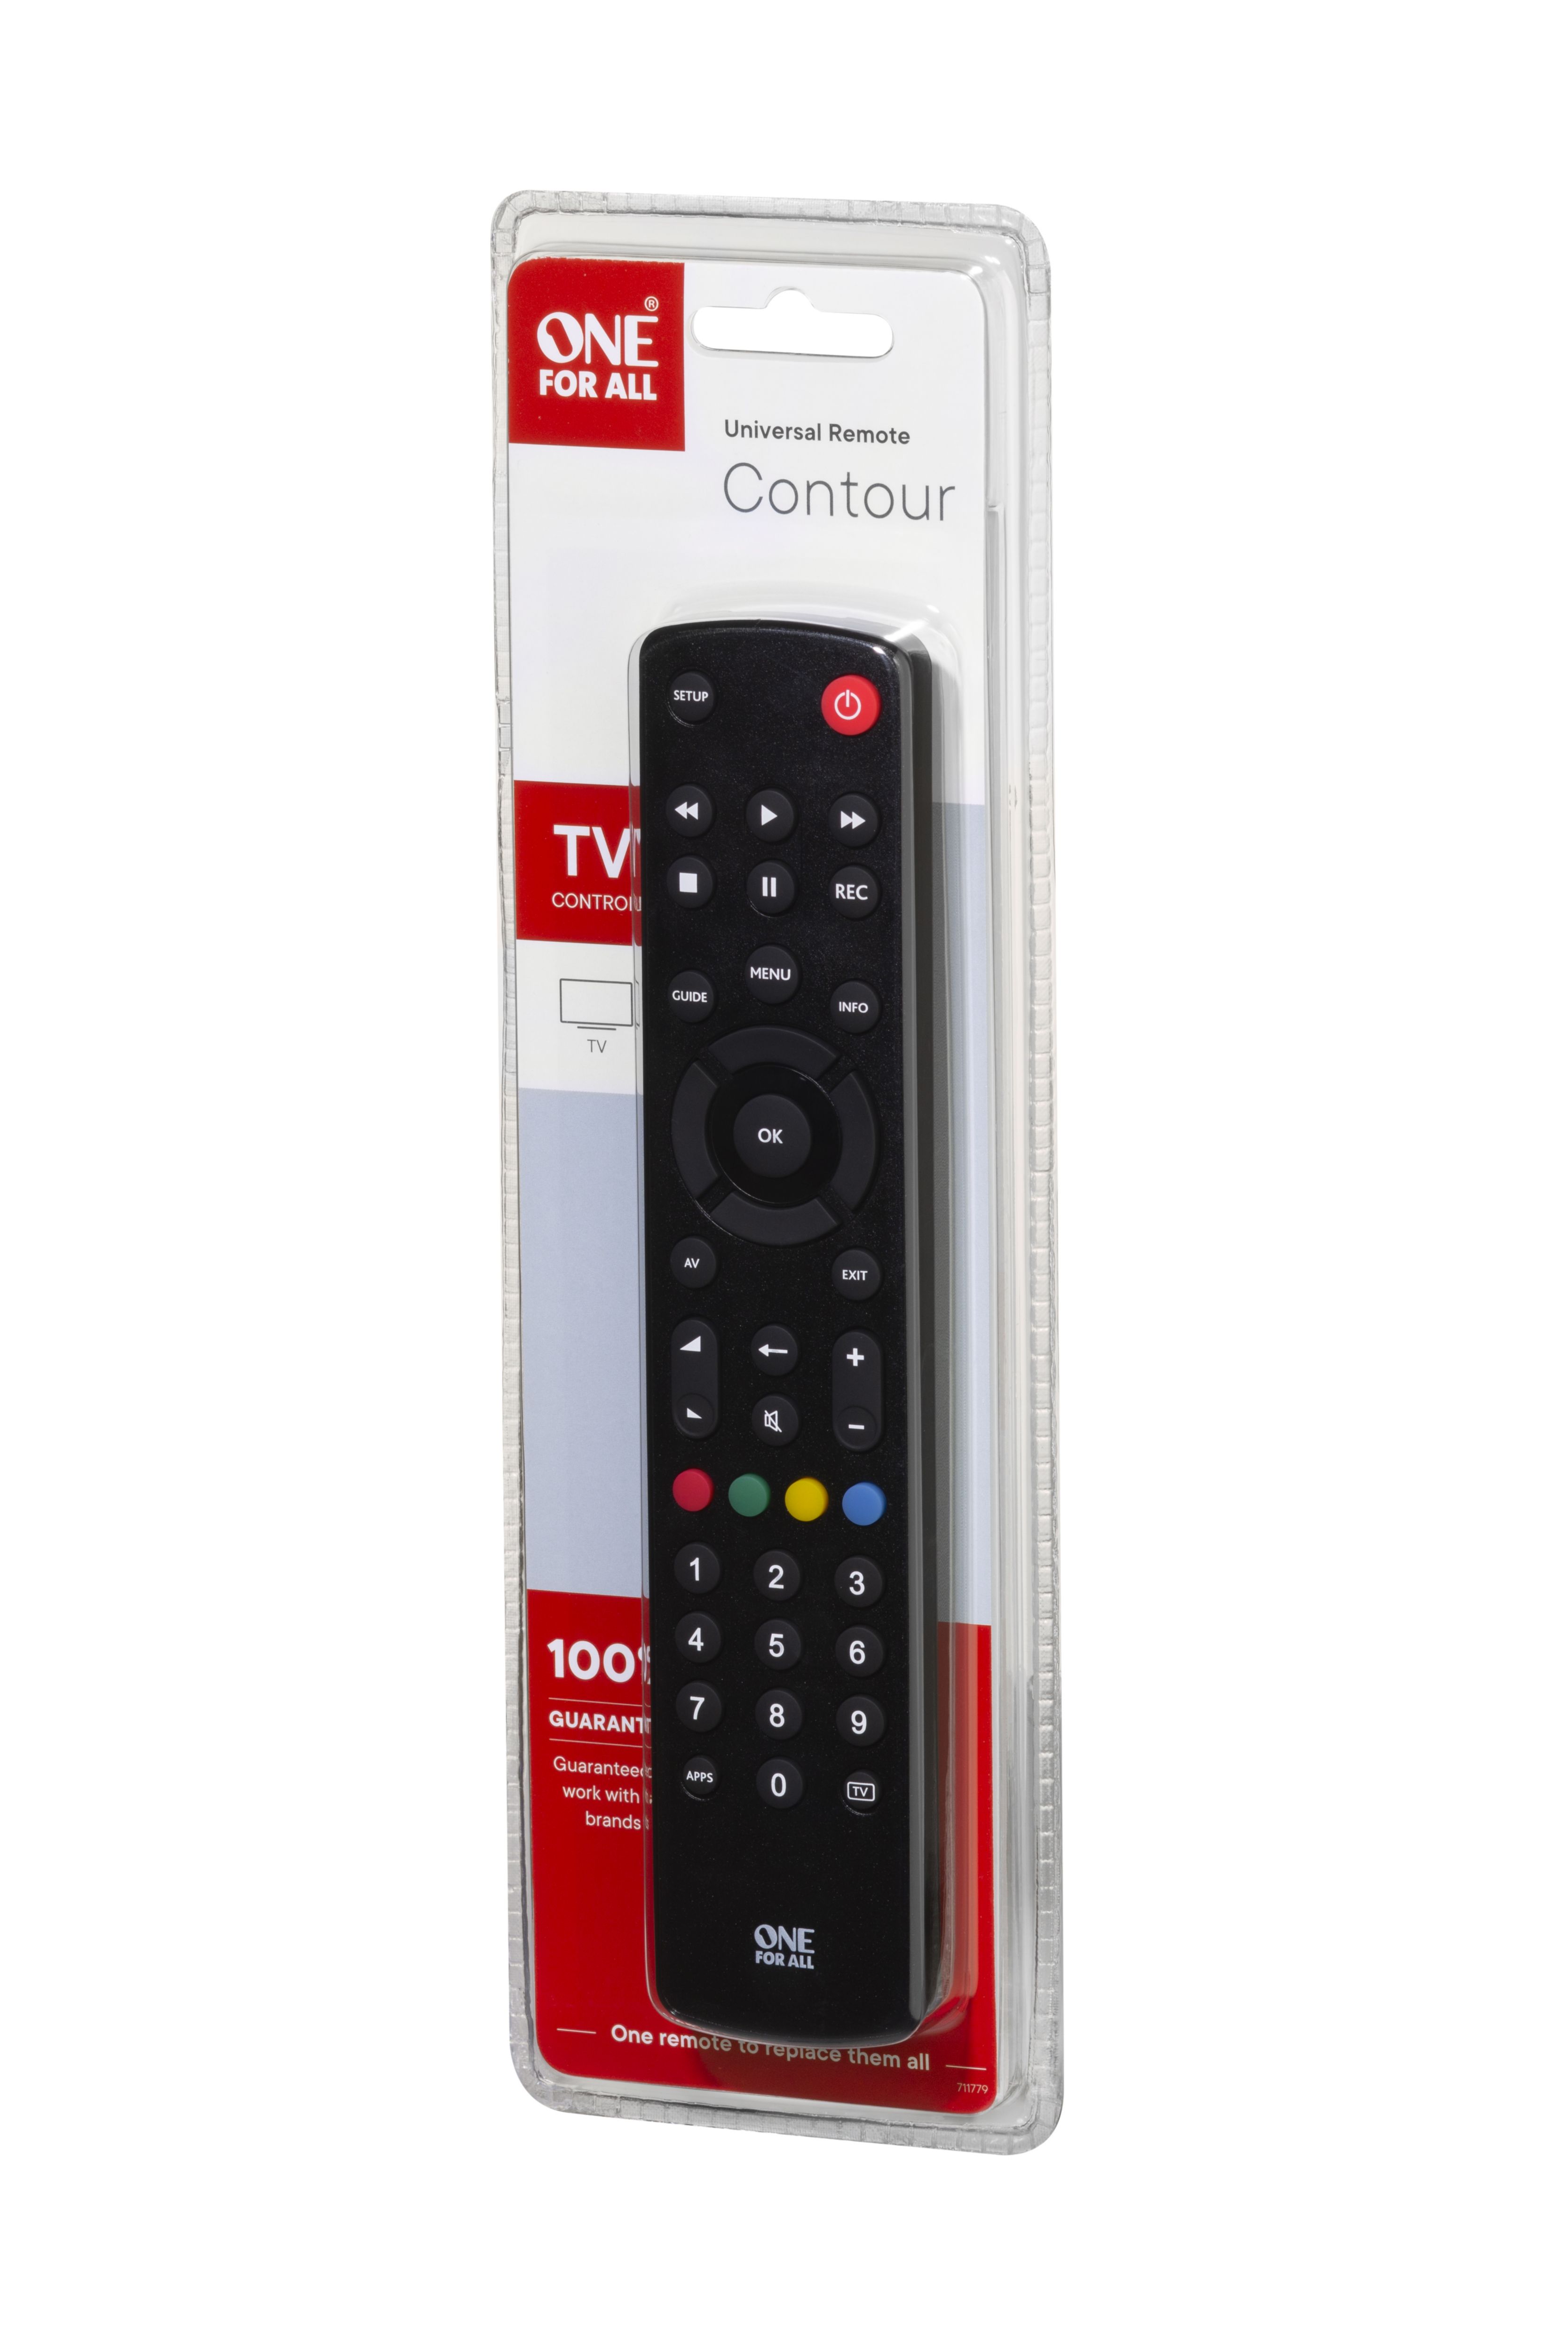 One For All Contour Remote control